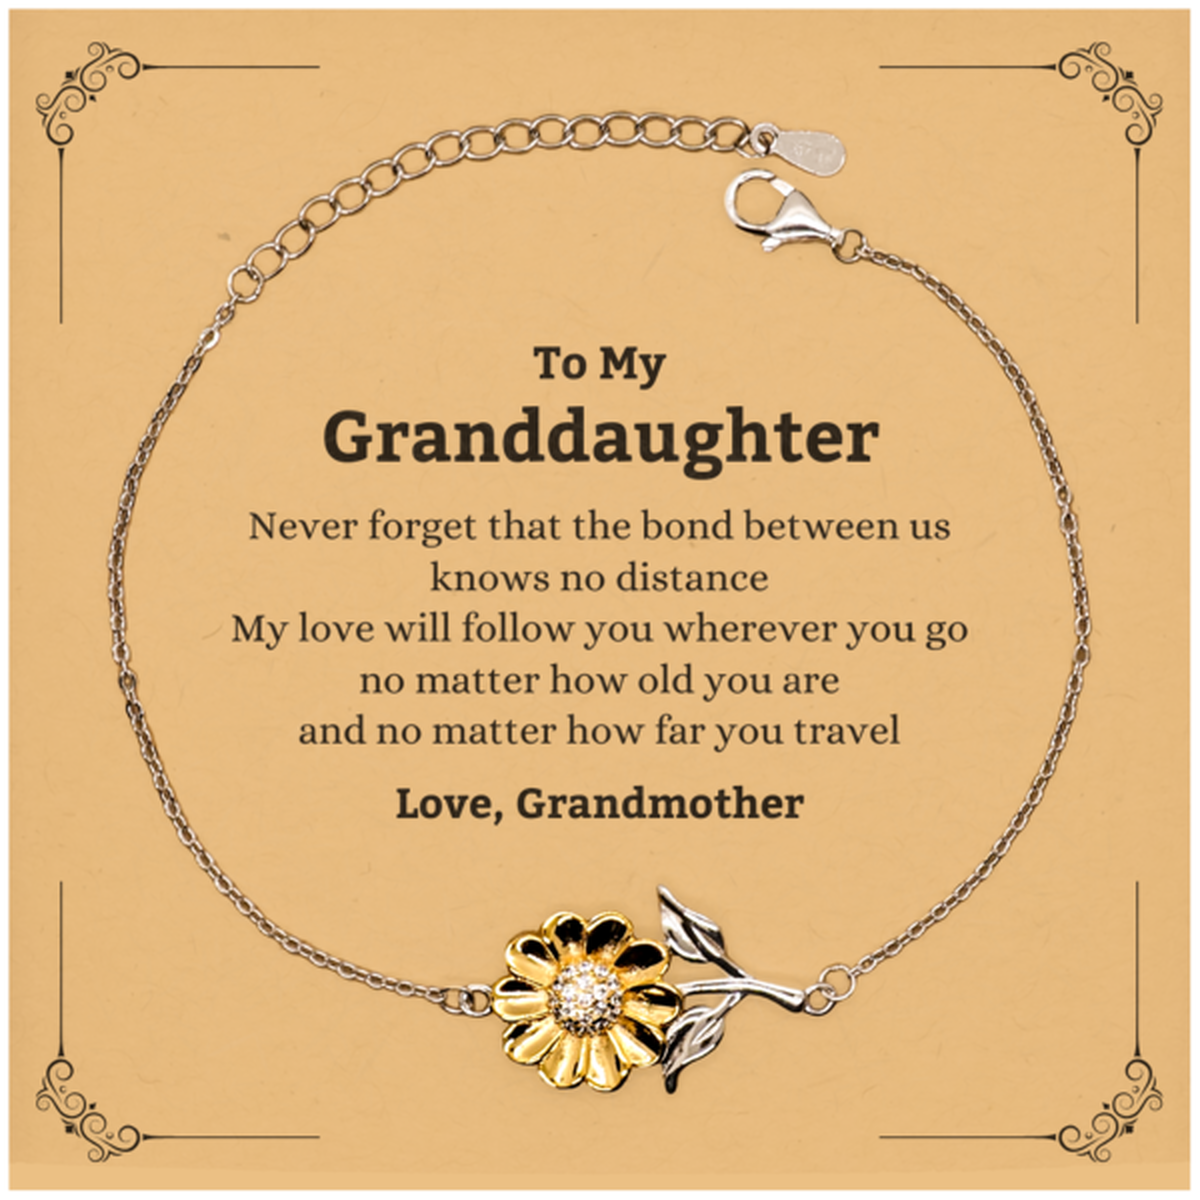 Granddaughter Birthday Gifts from Grandmother, Adjustable Sunflower Bracelet for Granddaughter Christmas Graduation Unique Gifts Granddaughter Never forget that the bond between us knows no distance. Love, Grandmother